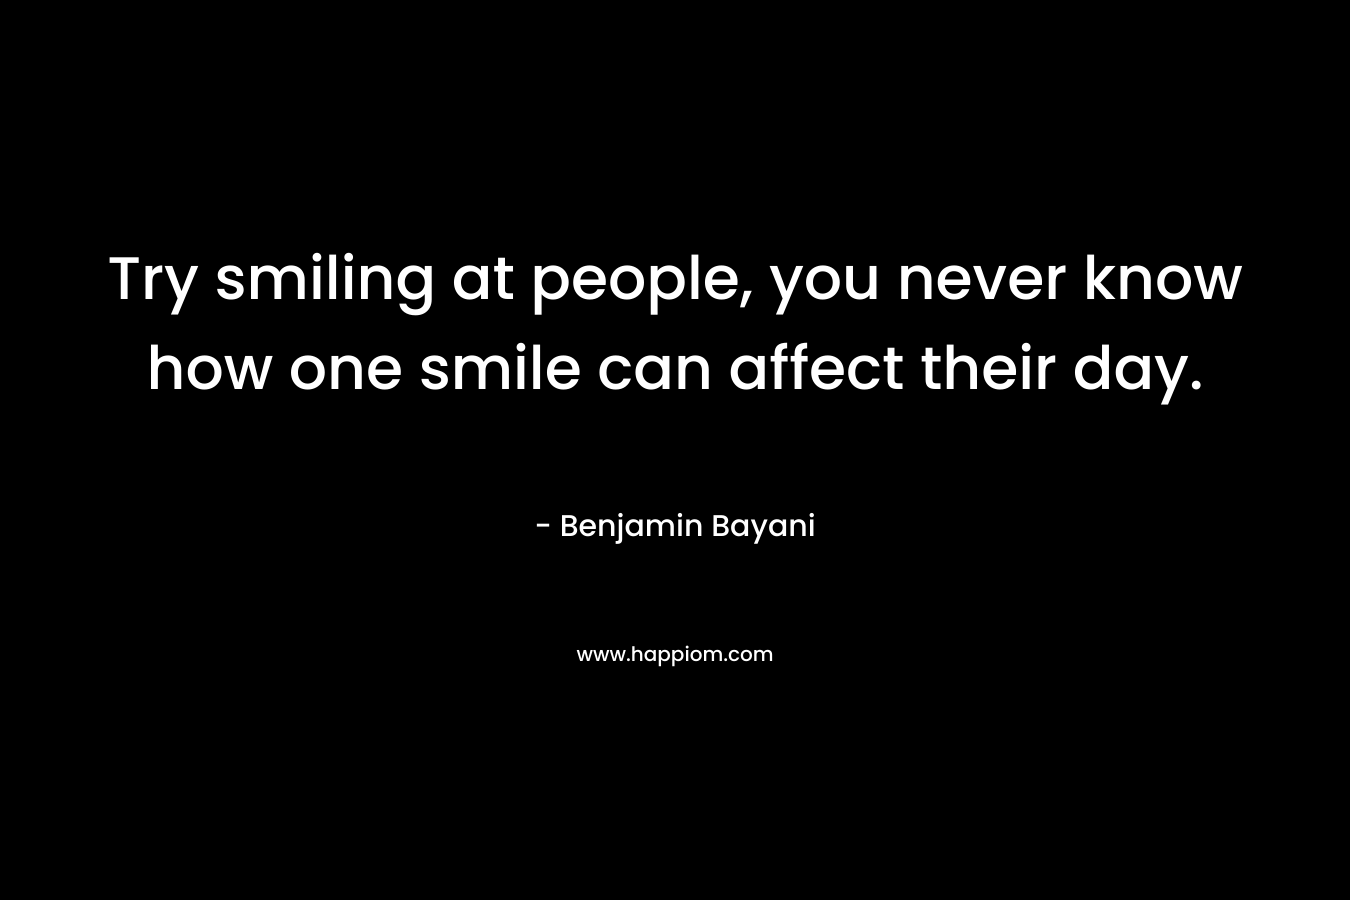 Try smiling at people, you never know how one smile can affect their day. – Benjamin Bayani